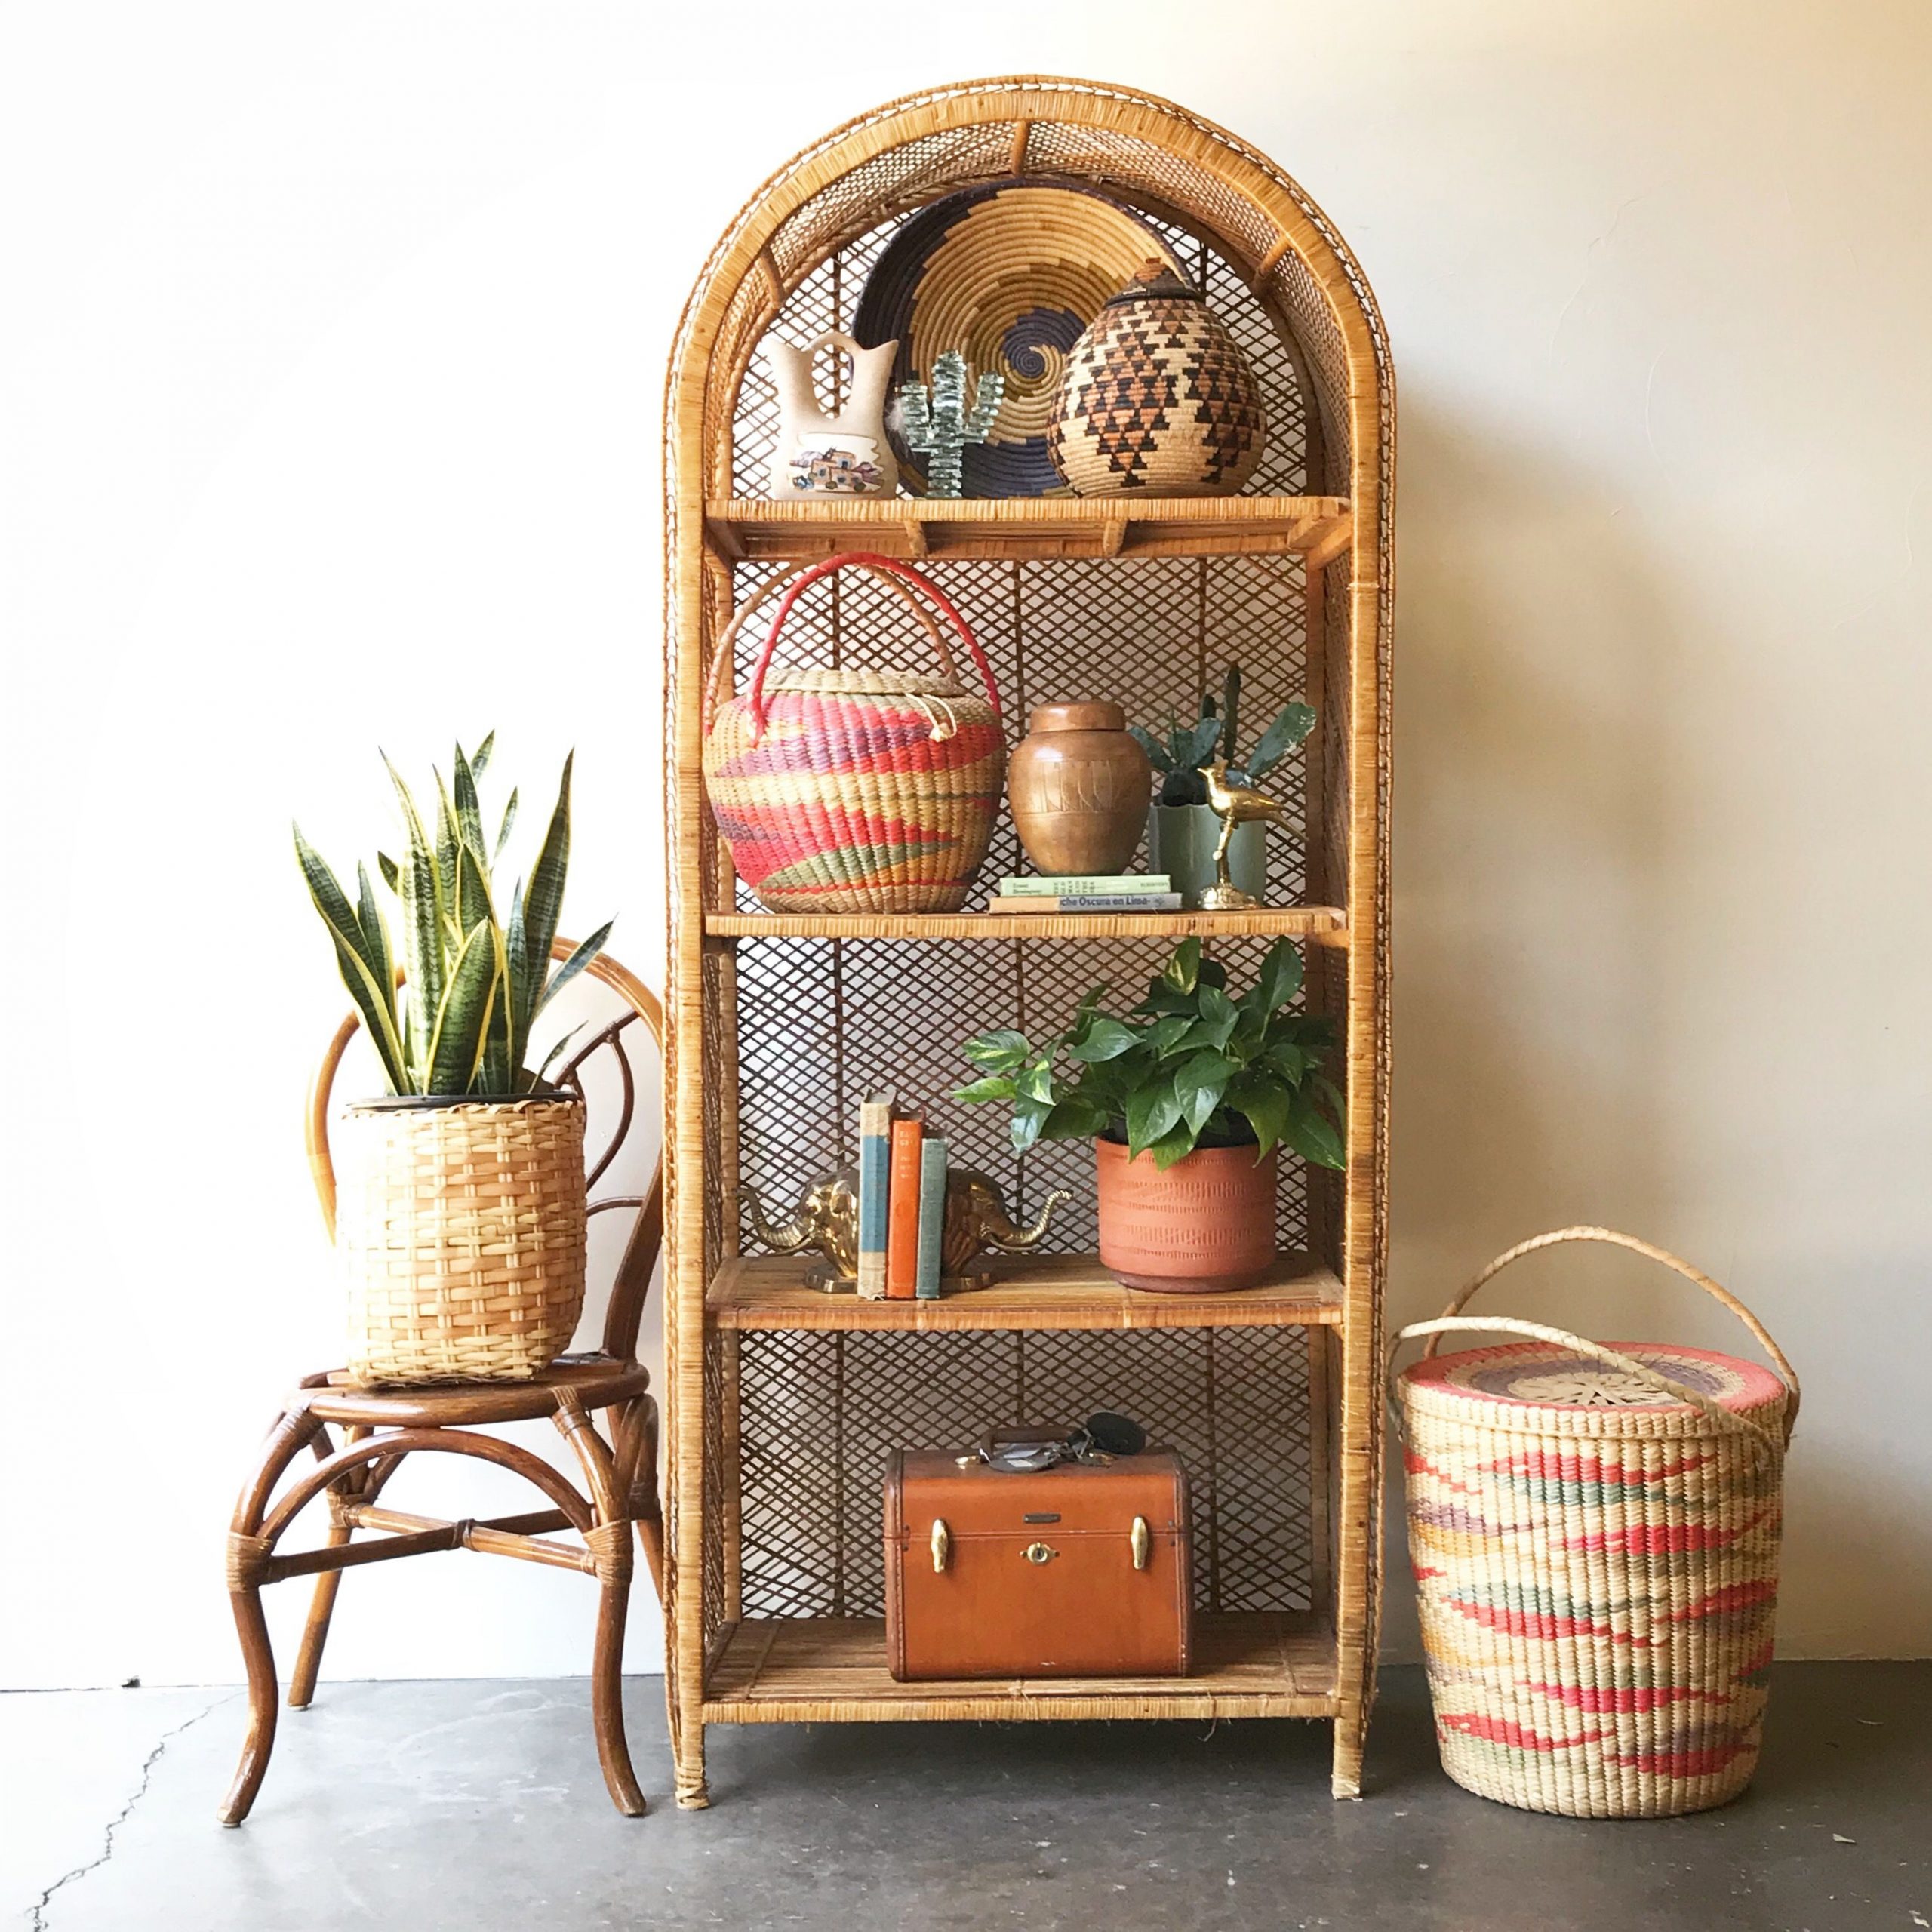 What’s Hot on Pinterest: 5 Vintage Decor Ideas for Your Home Decor